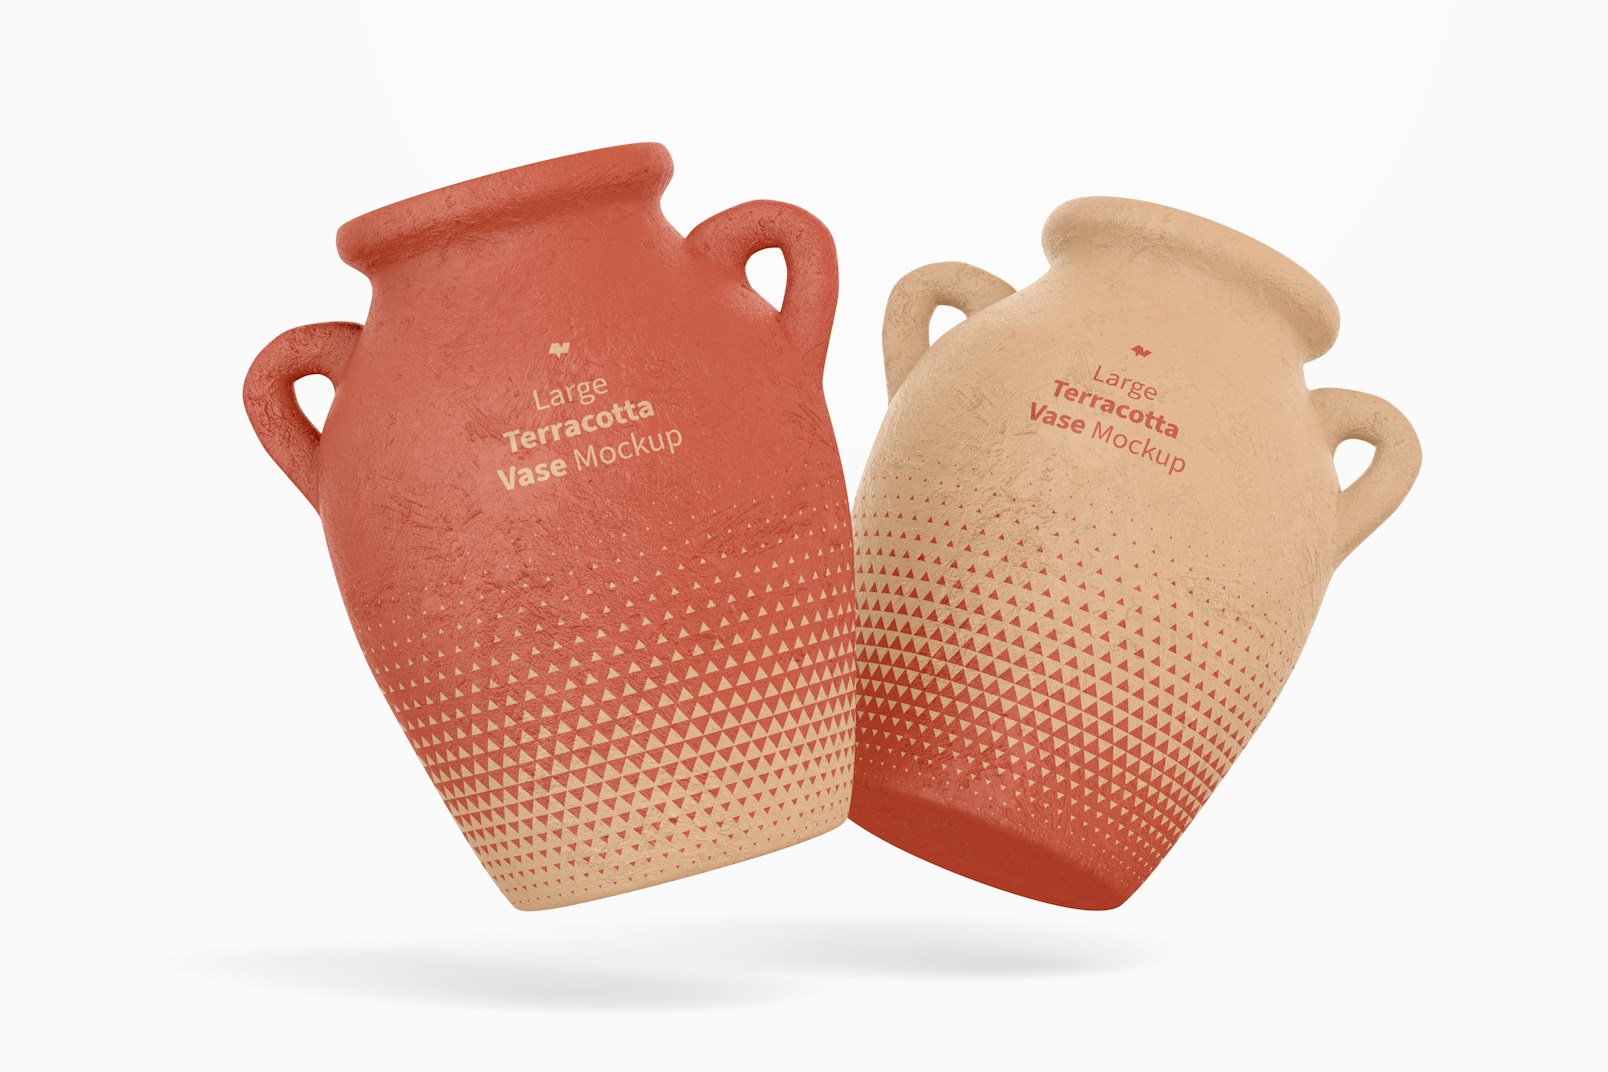 Large Terracotta Vases with Handles Mockup, Falling